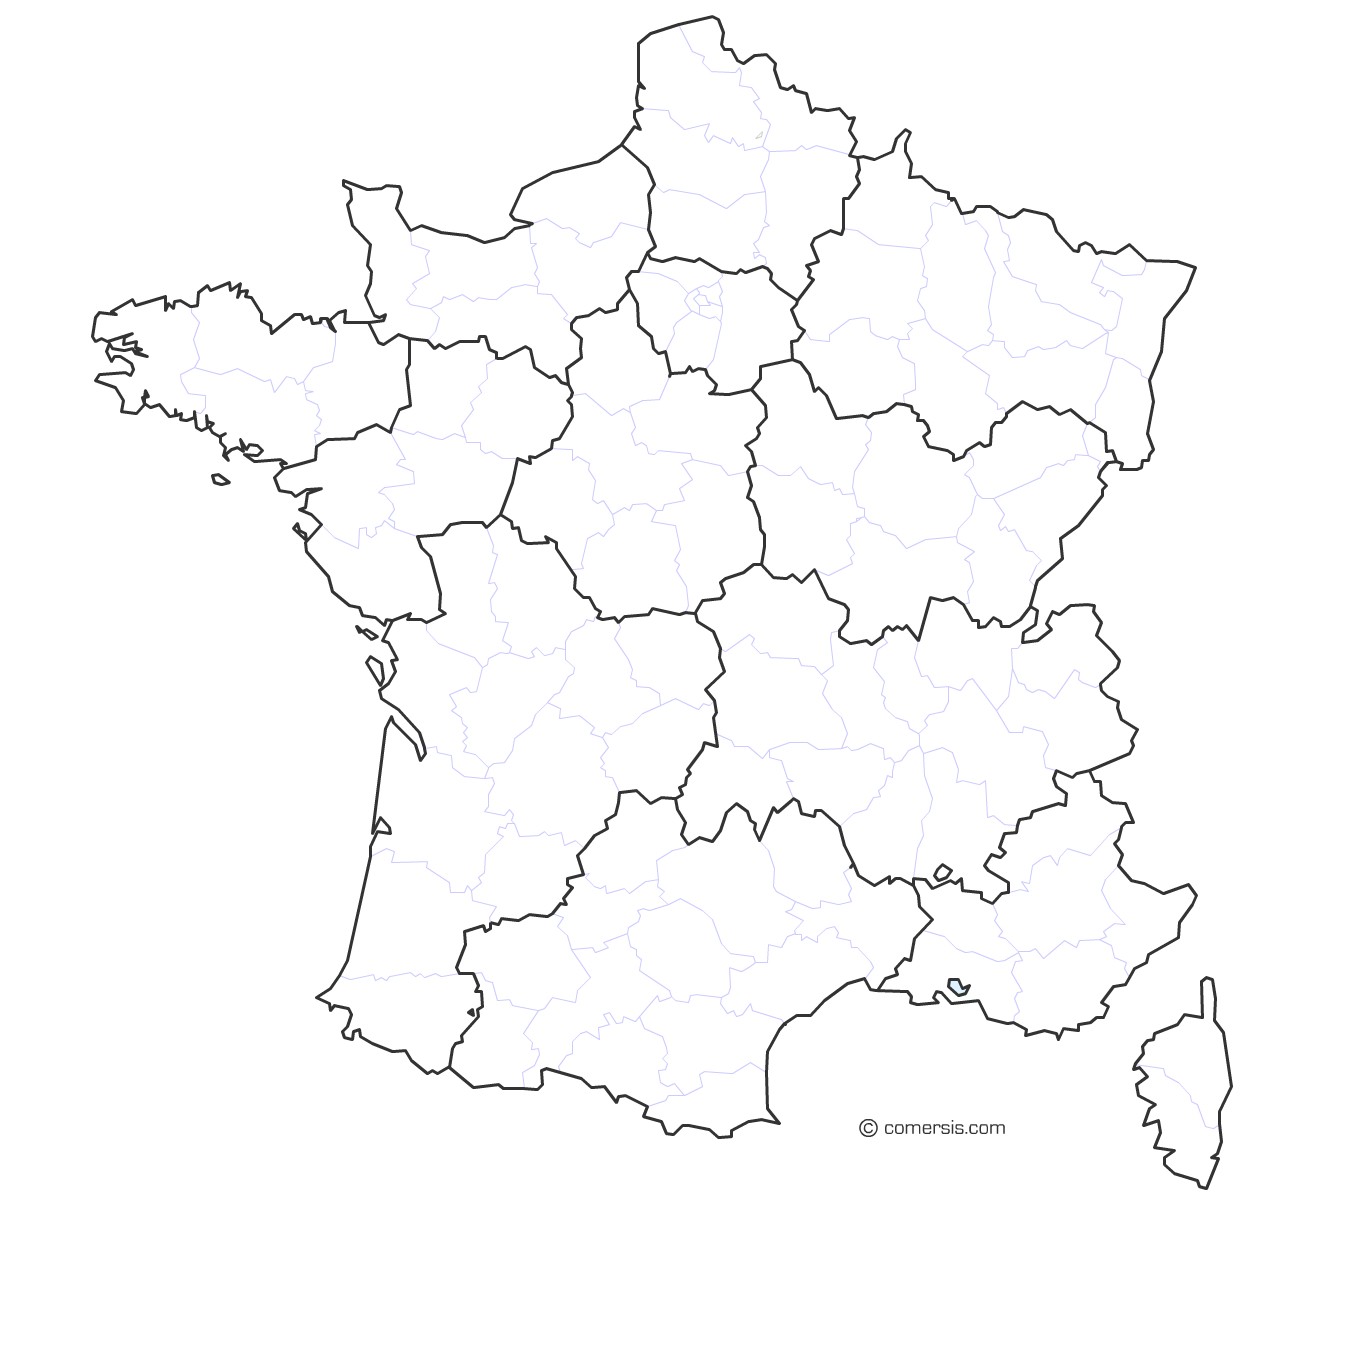 French Regions and departments map